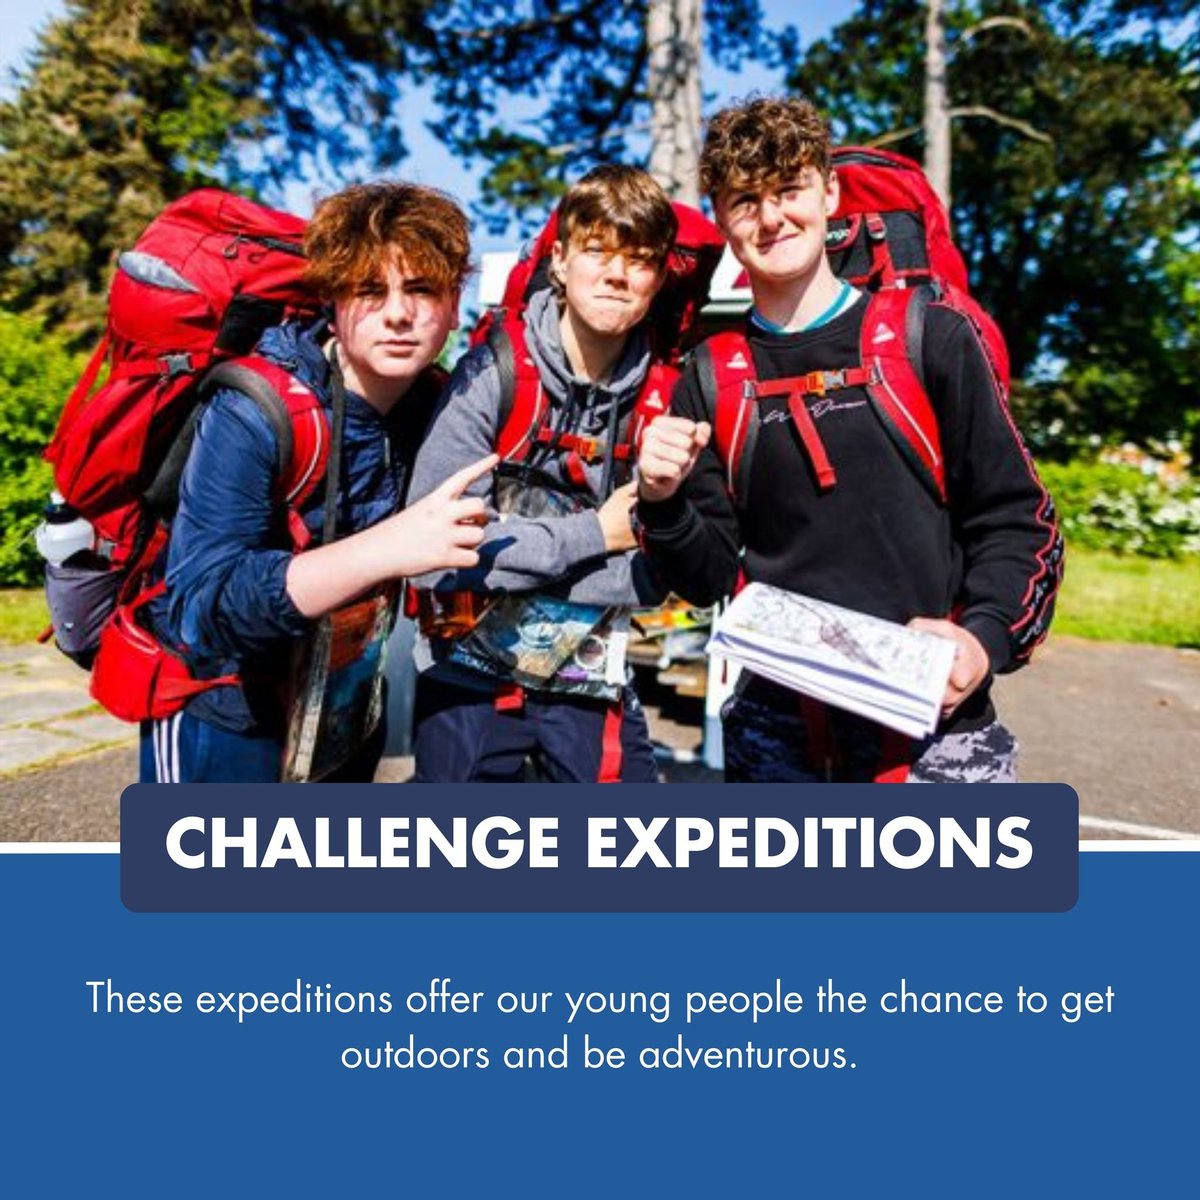 We have some exciting challenge expeditions coming up this year, with categories for both young people and leaders, as well as options to take part on one day or both! To find out more, head to boys-brigade.org.uk/events/